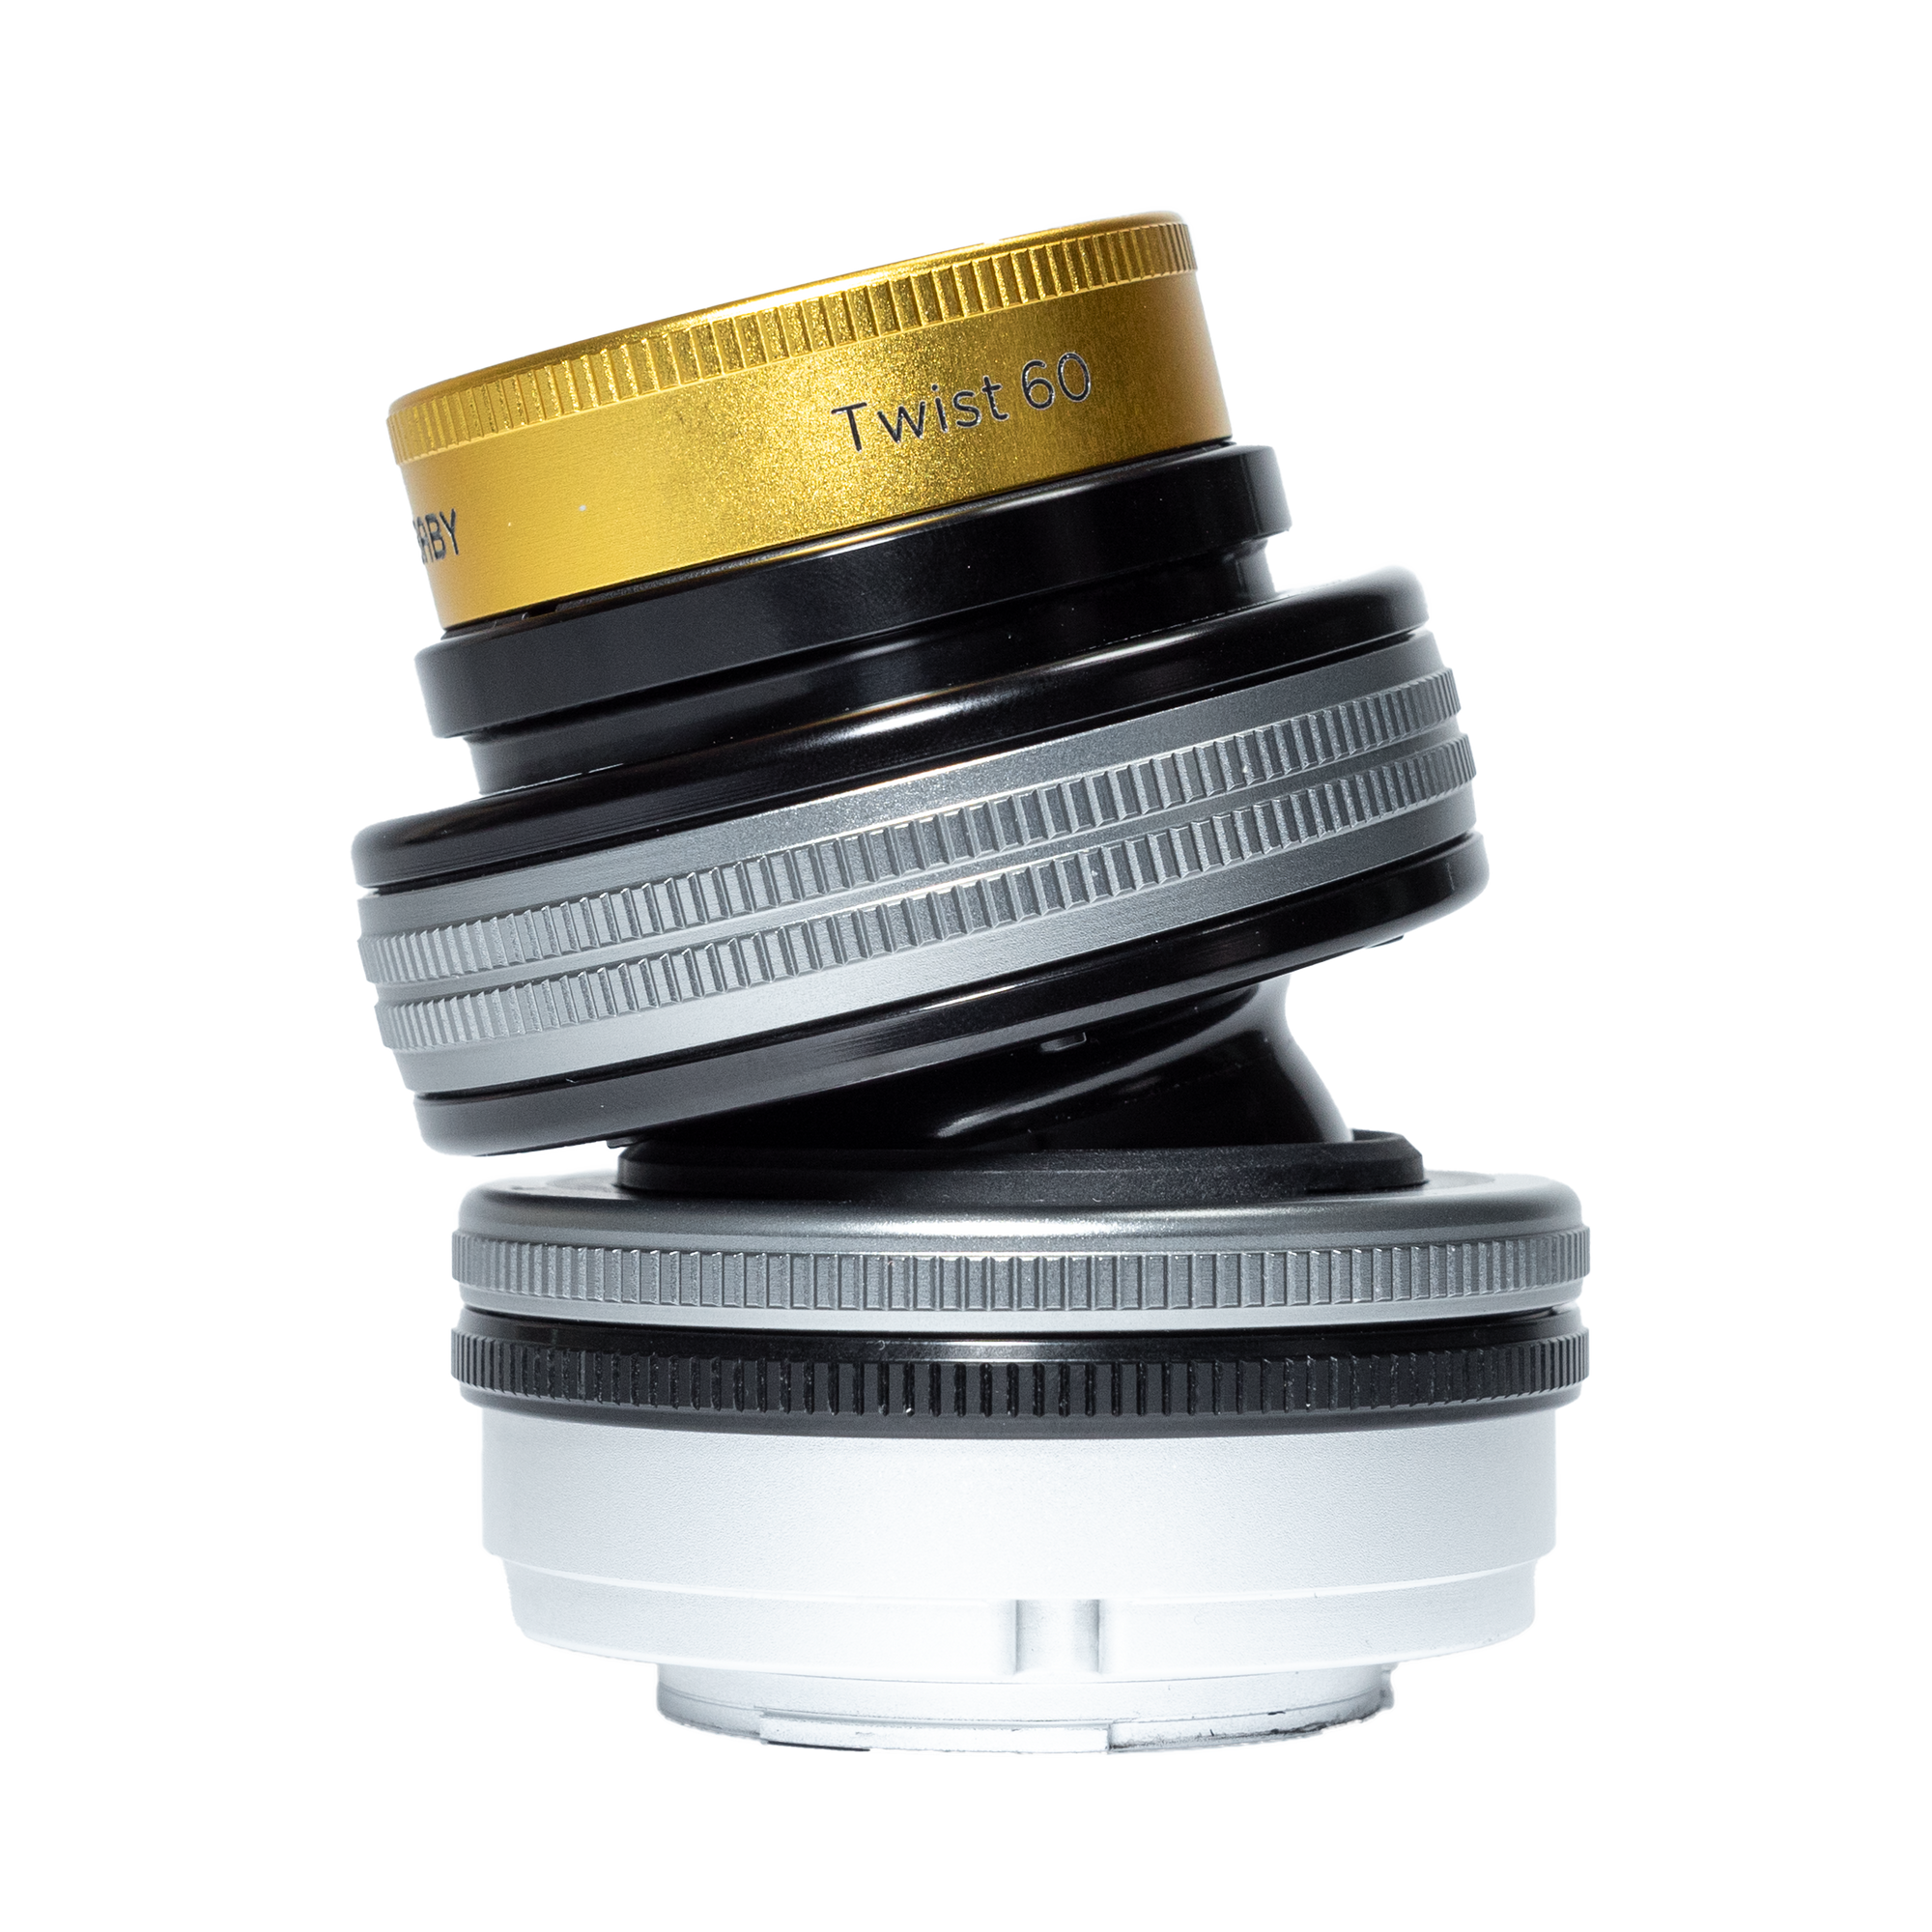 CPII + Twist 60 ND | Camera Lens With Swirl Effect | Lensbaby